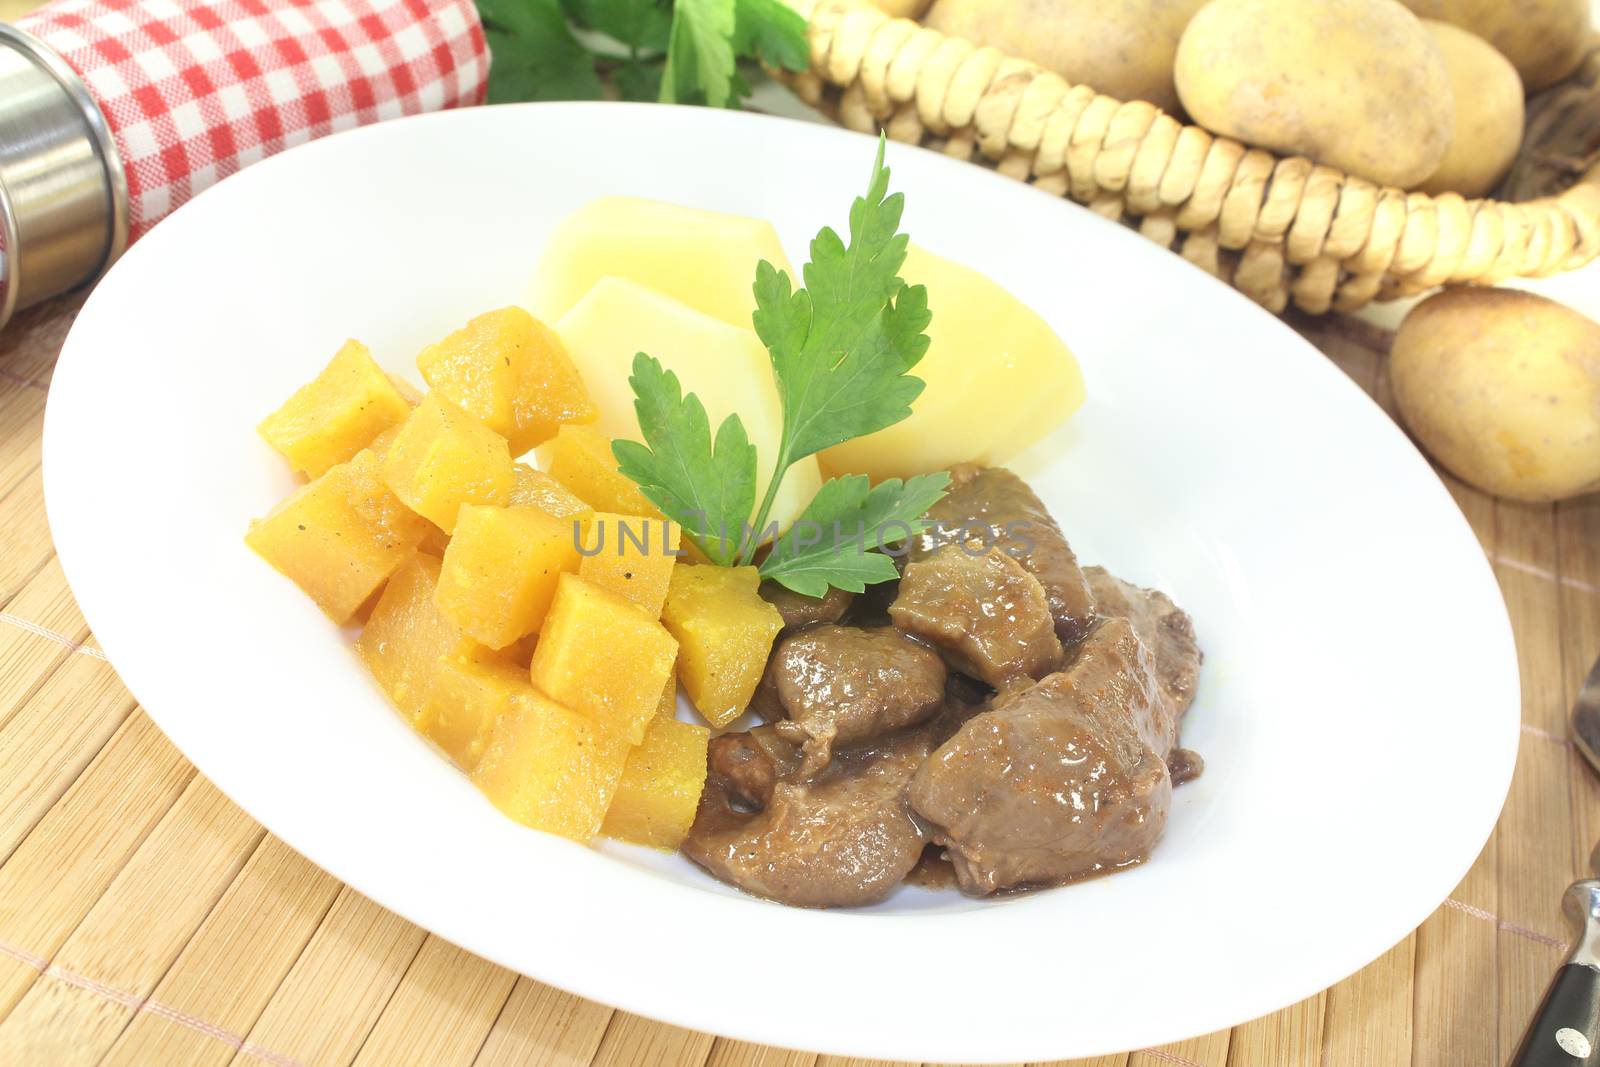 Venison goulash with rutabaga and parsley by discovery